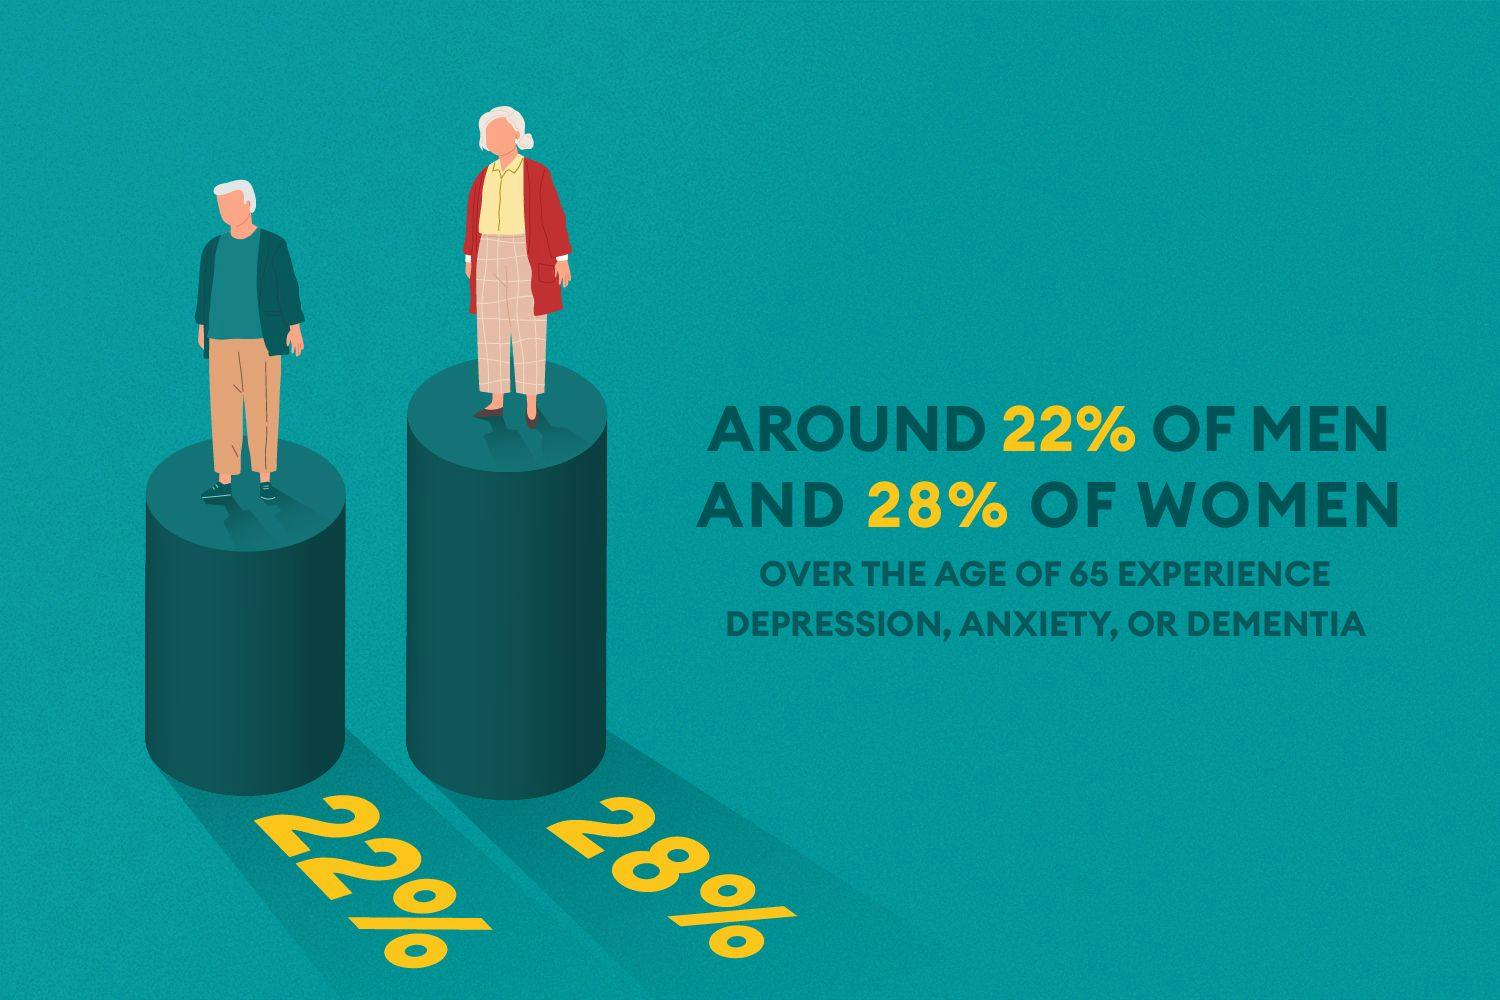 men and women affected by depression, anxiety or dementia